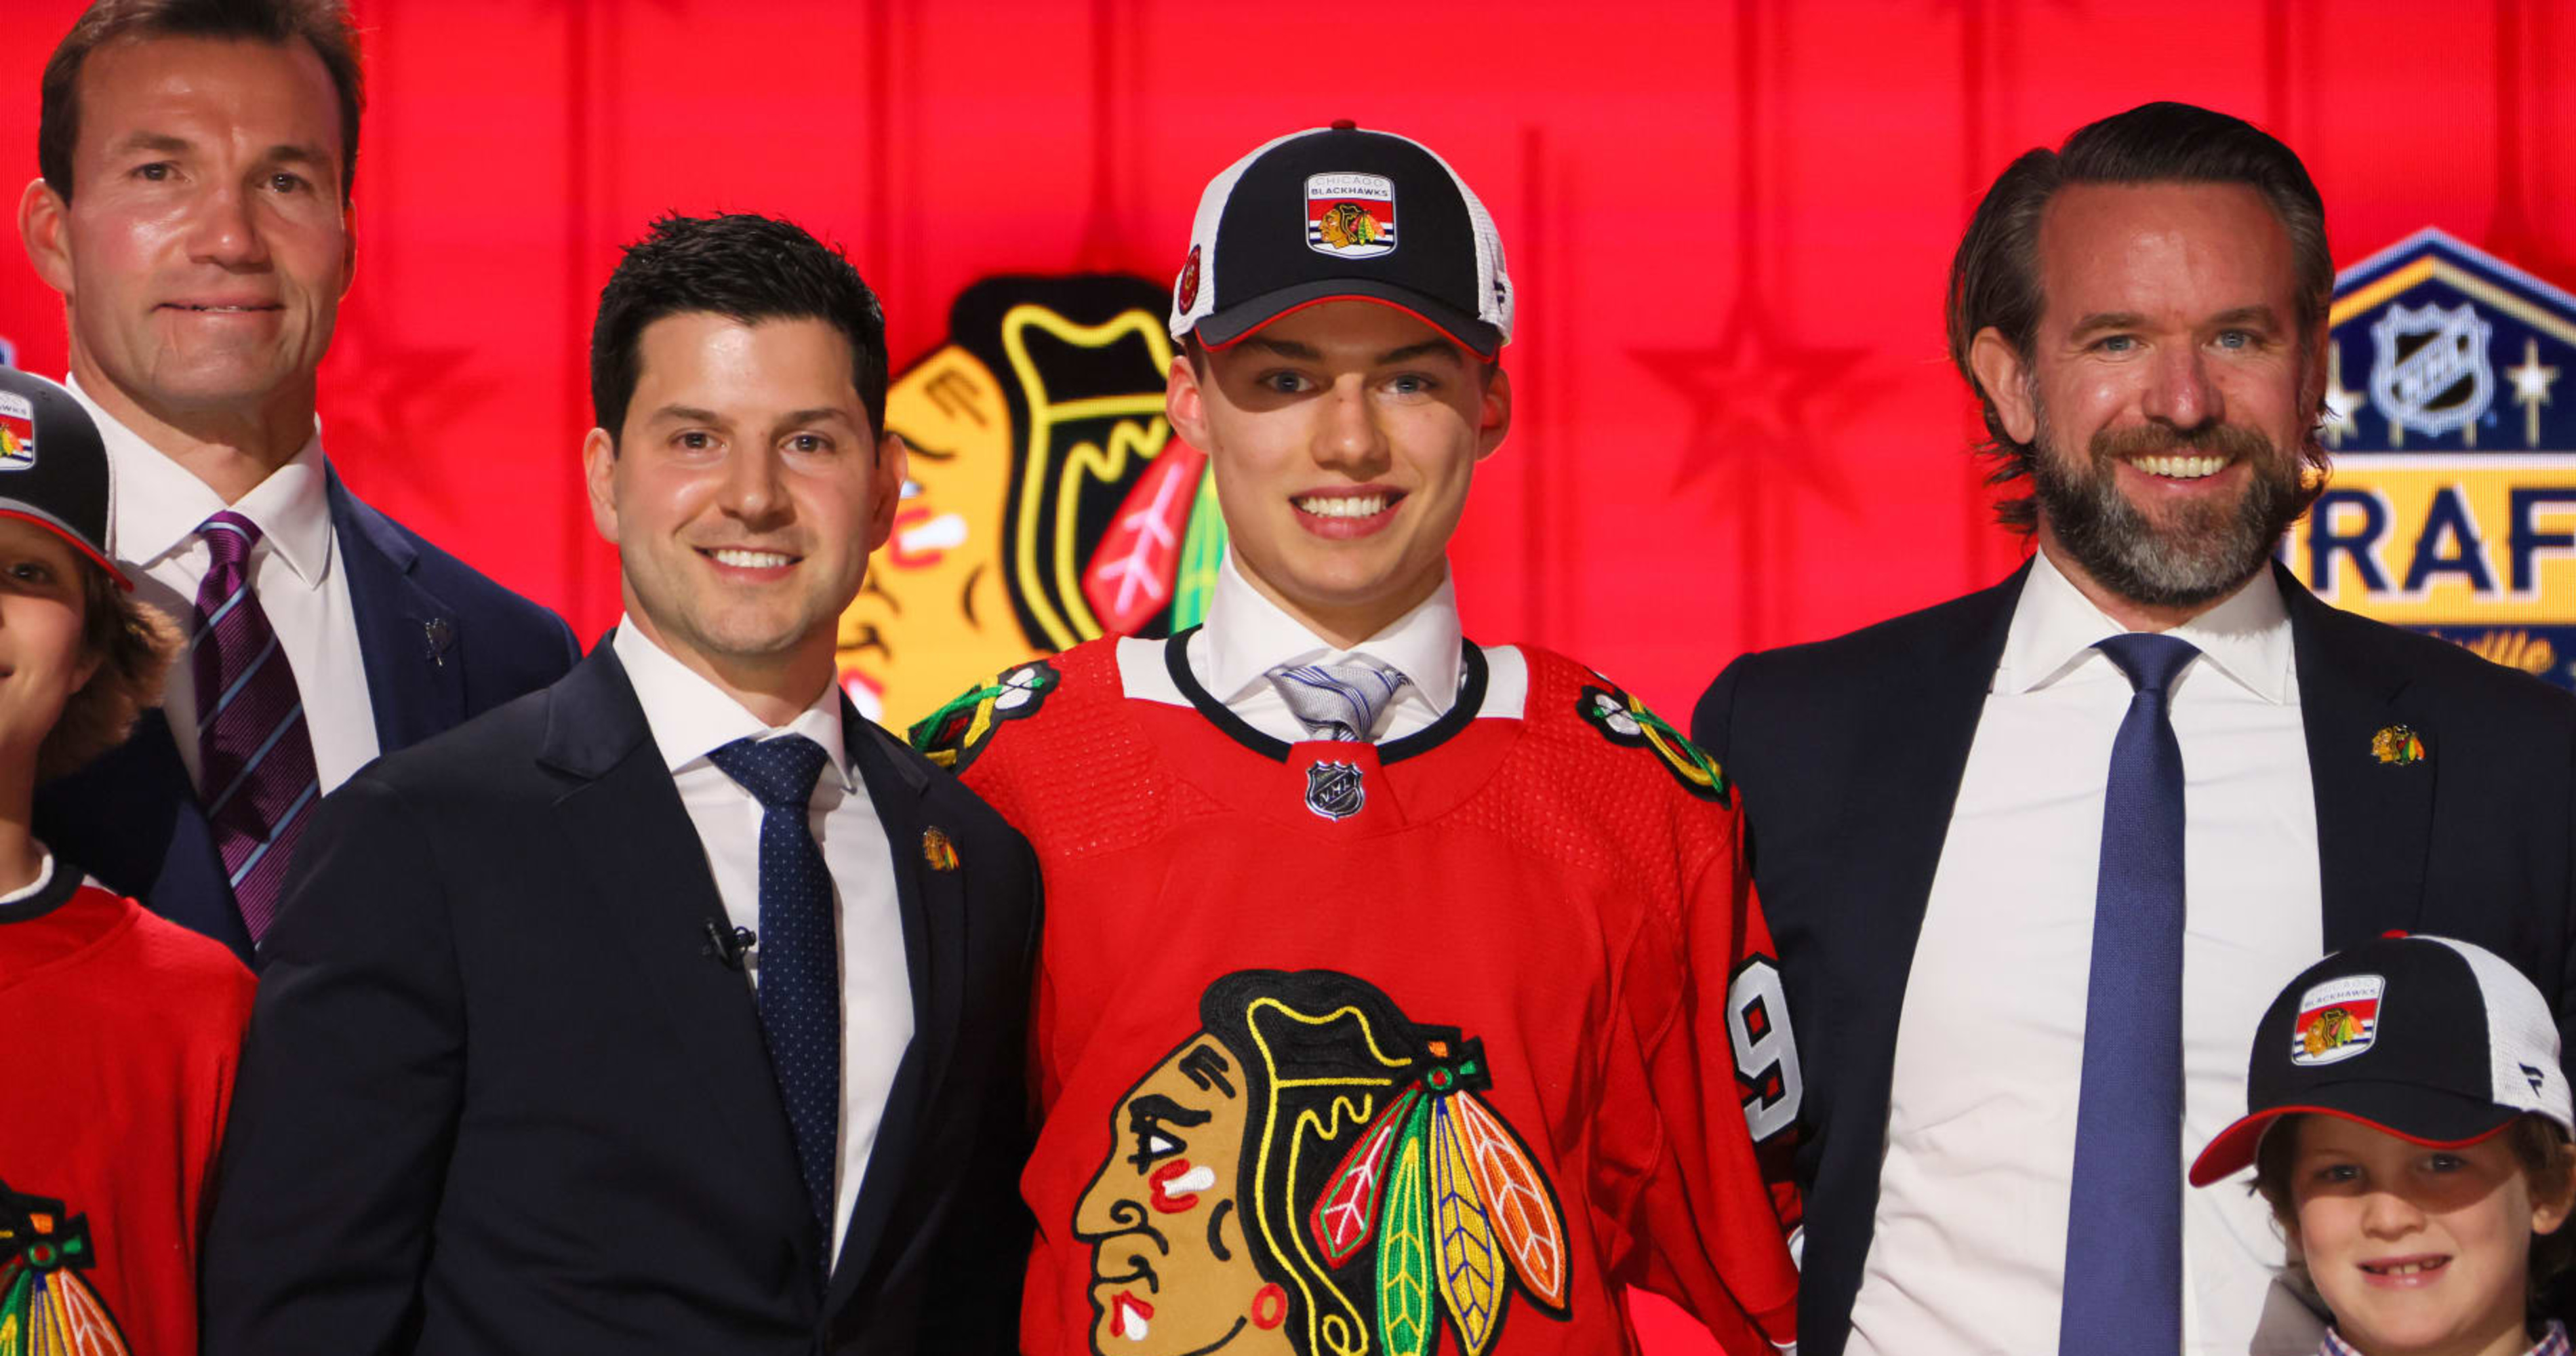 What is Connor Bedard's jersey number? Will the projected No. 1 pick wear  same number in NHL?